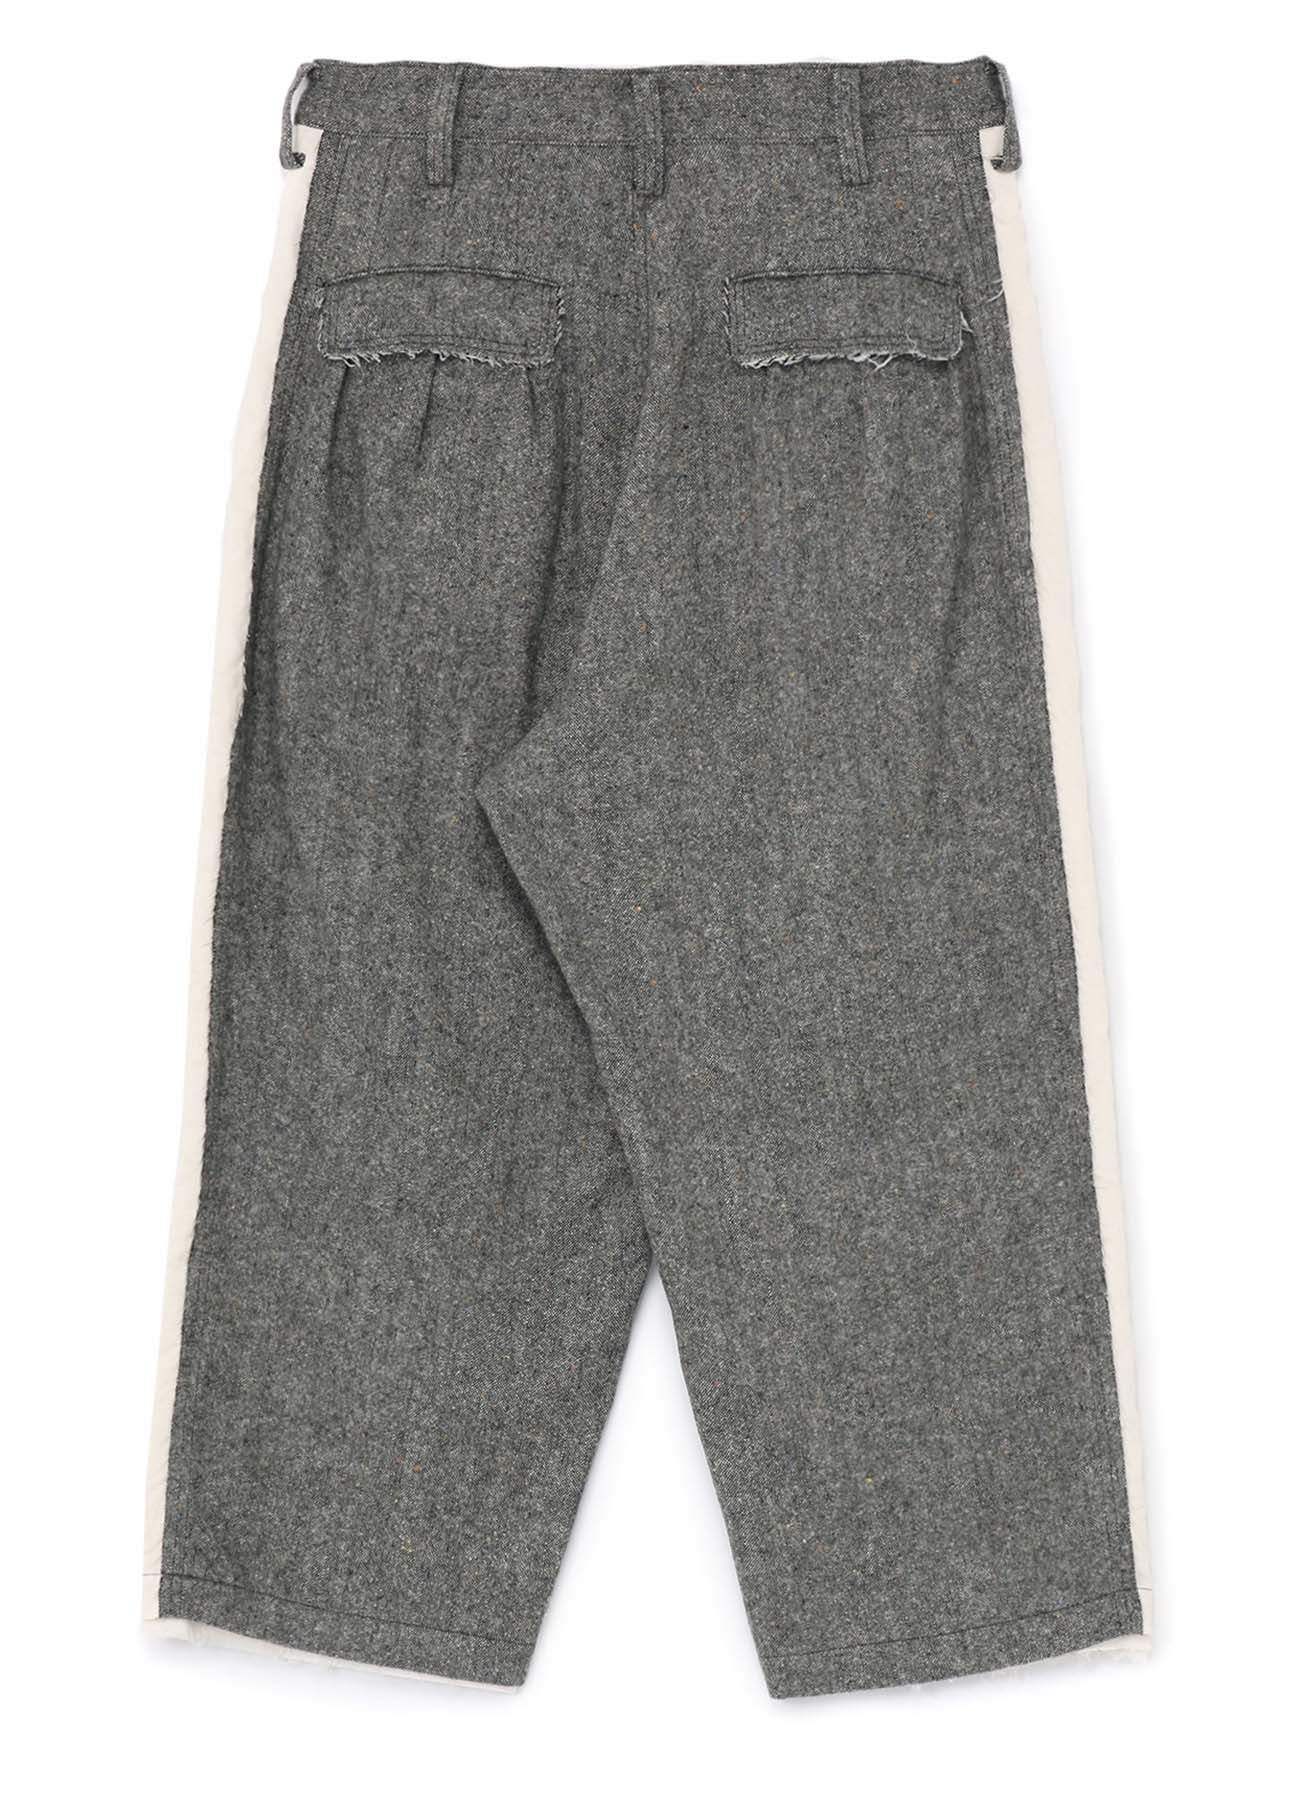 ETERMINE NEP TWEED+COTTON TWILL SIDE SWITCHING PANTS